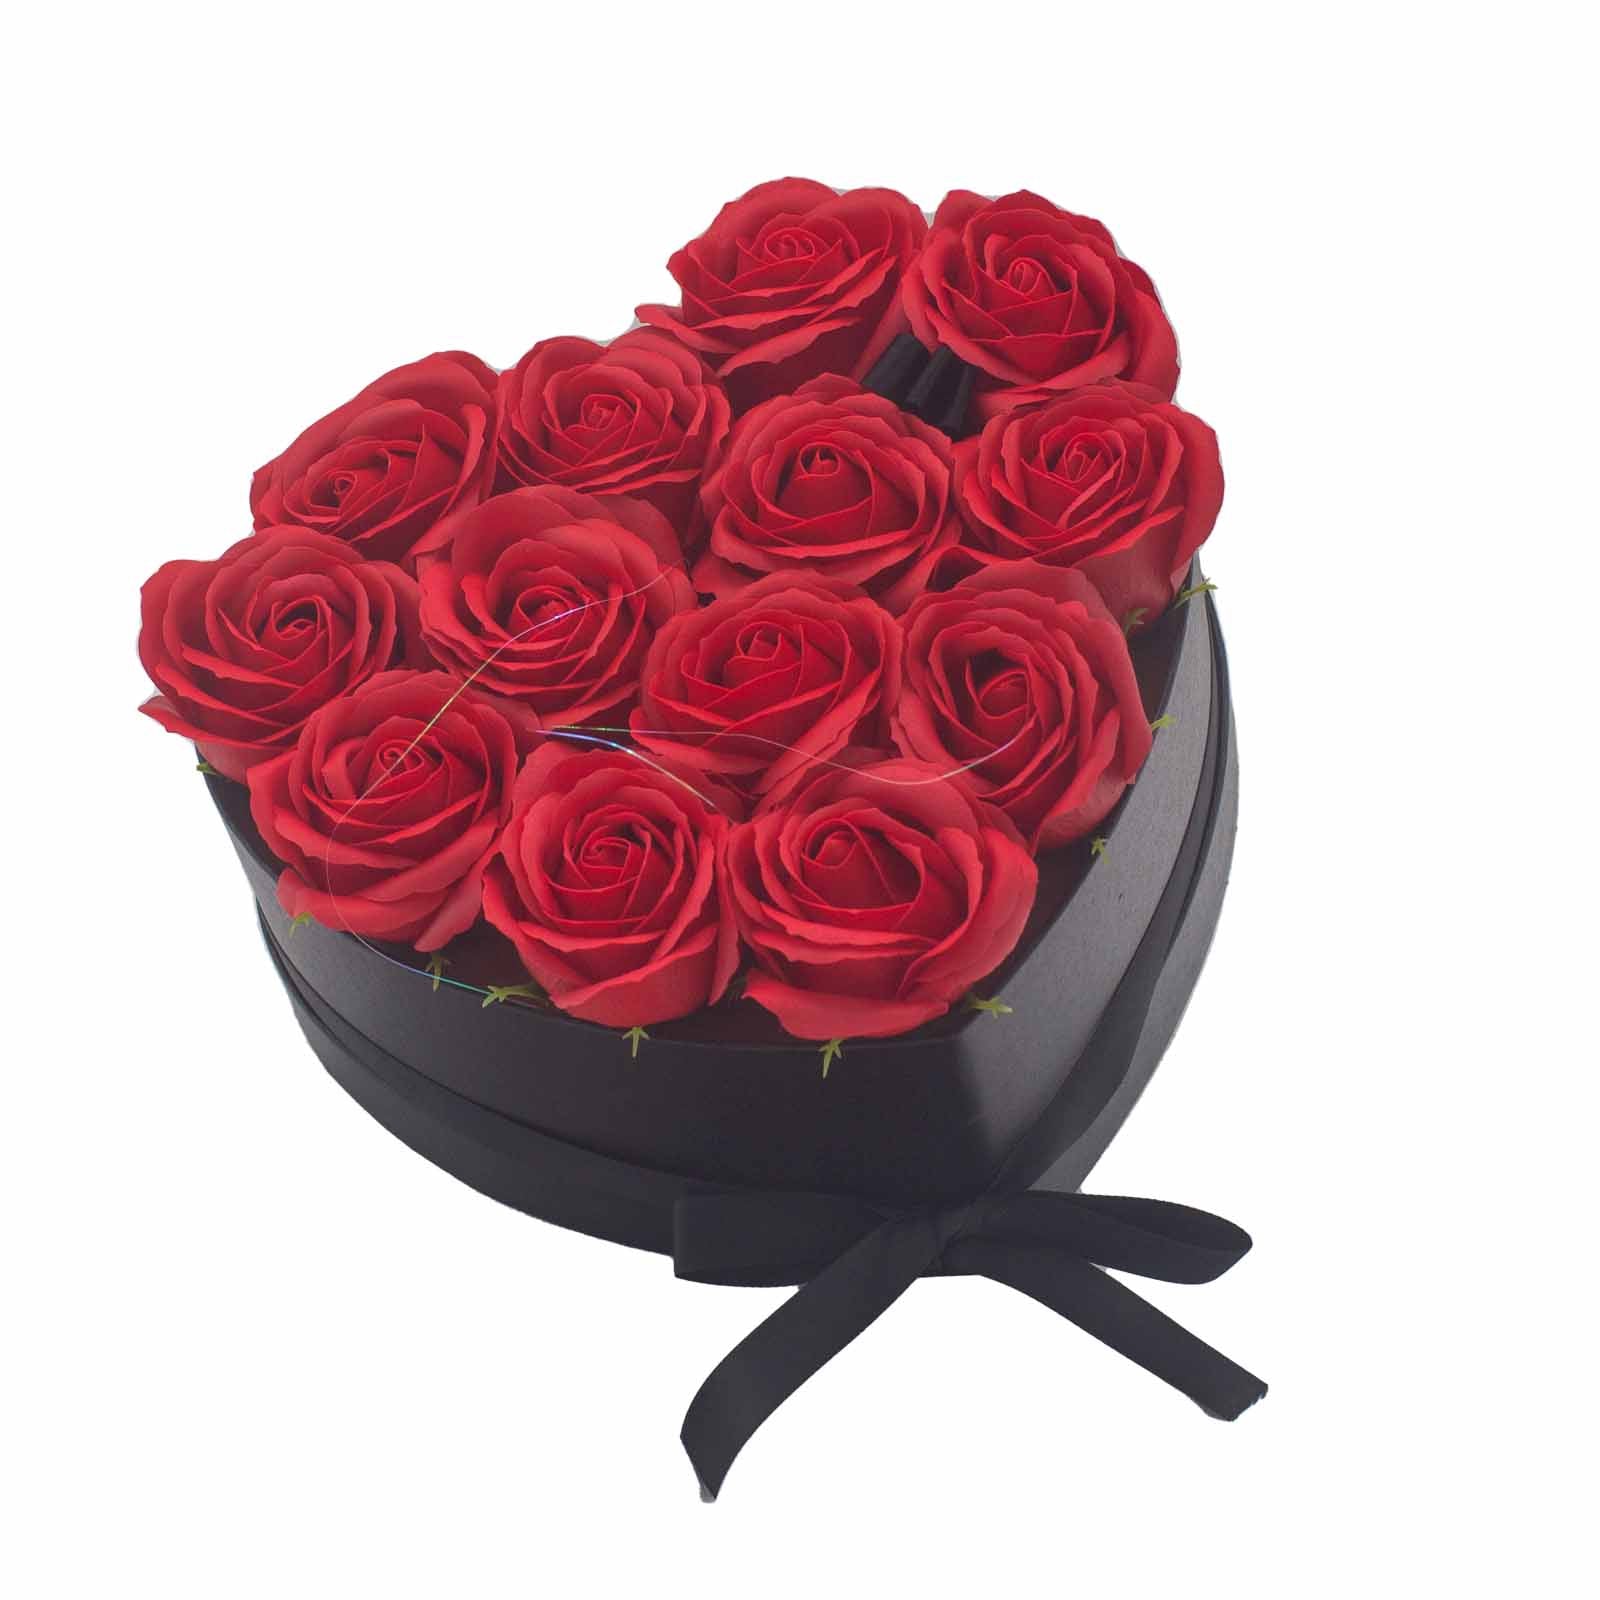 View Soap Flower Gift Bouquet 13 Red Roses Heart information